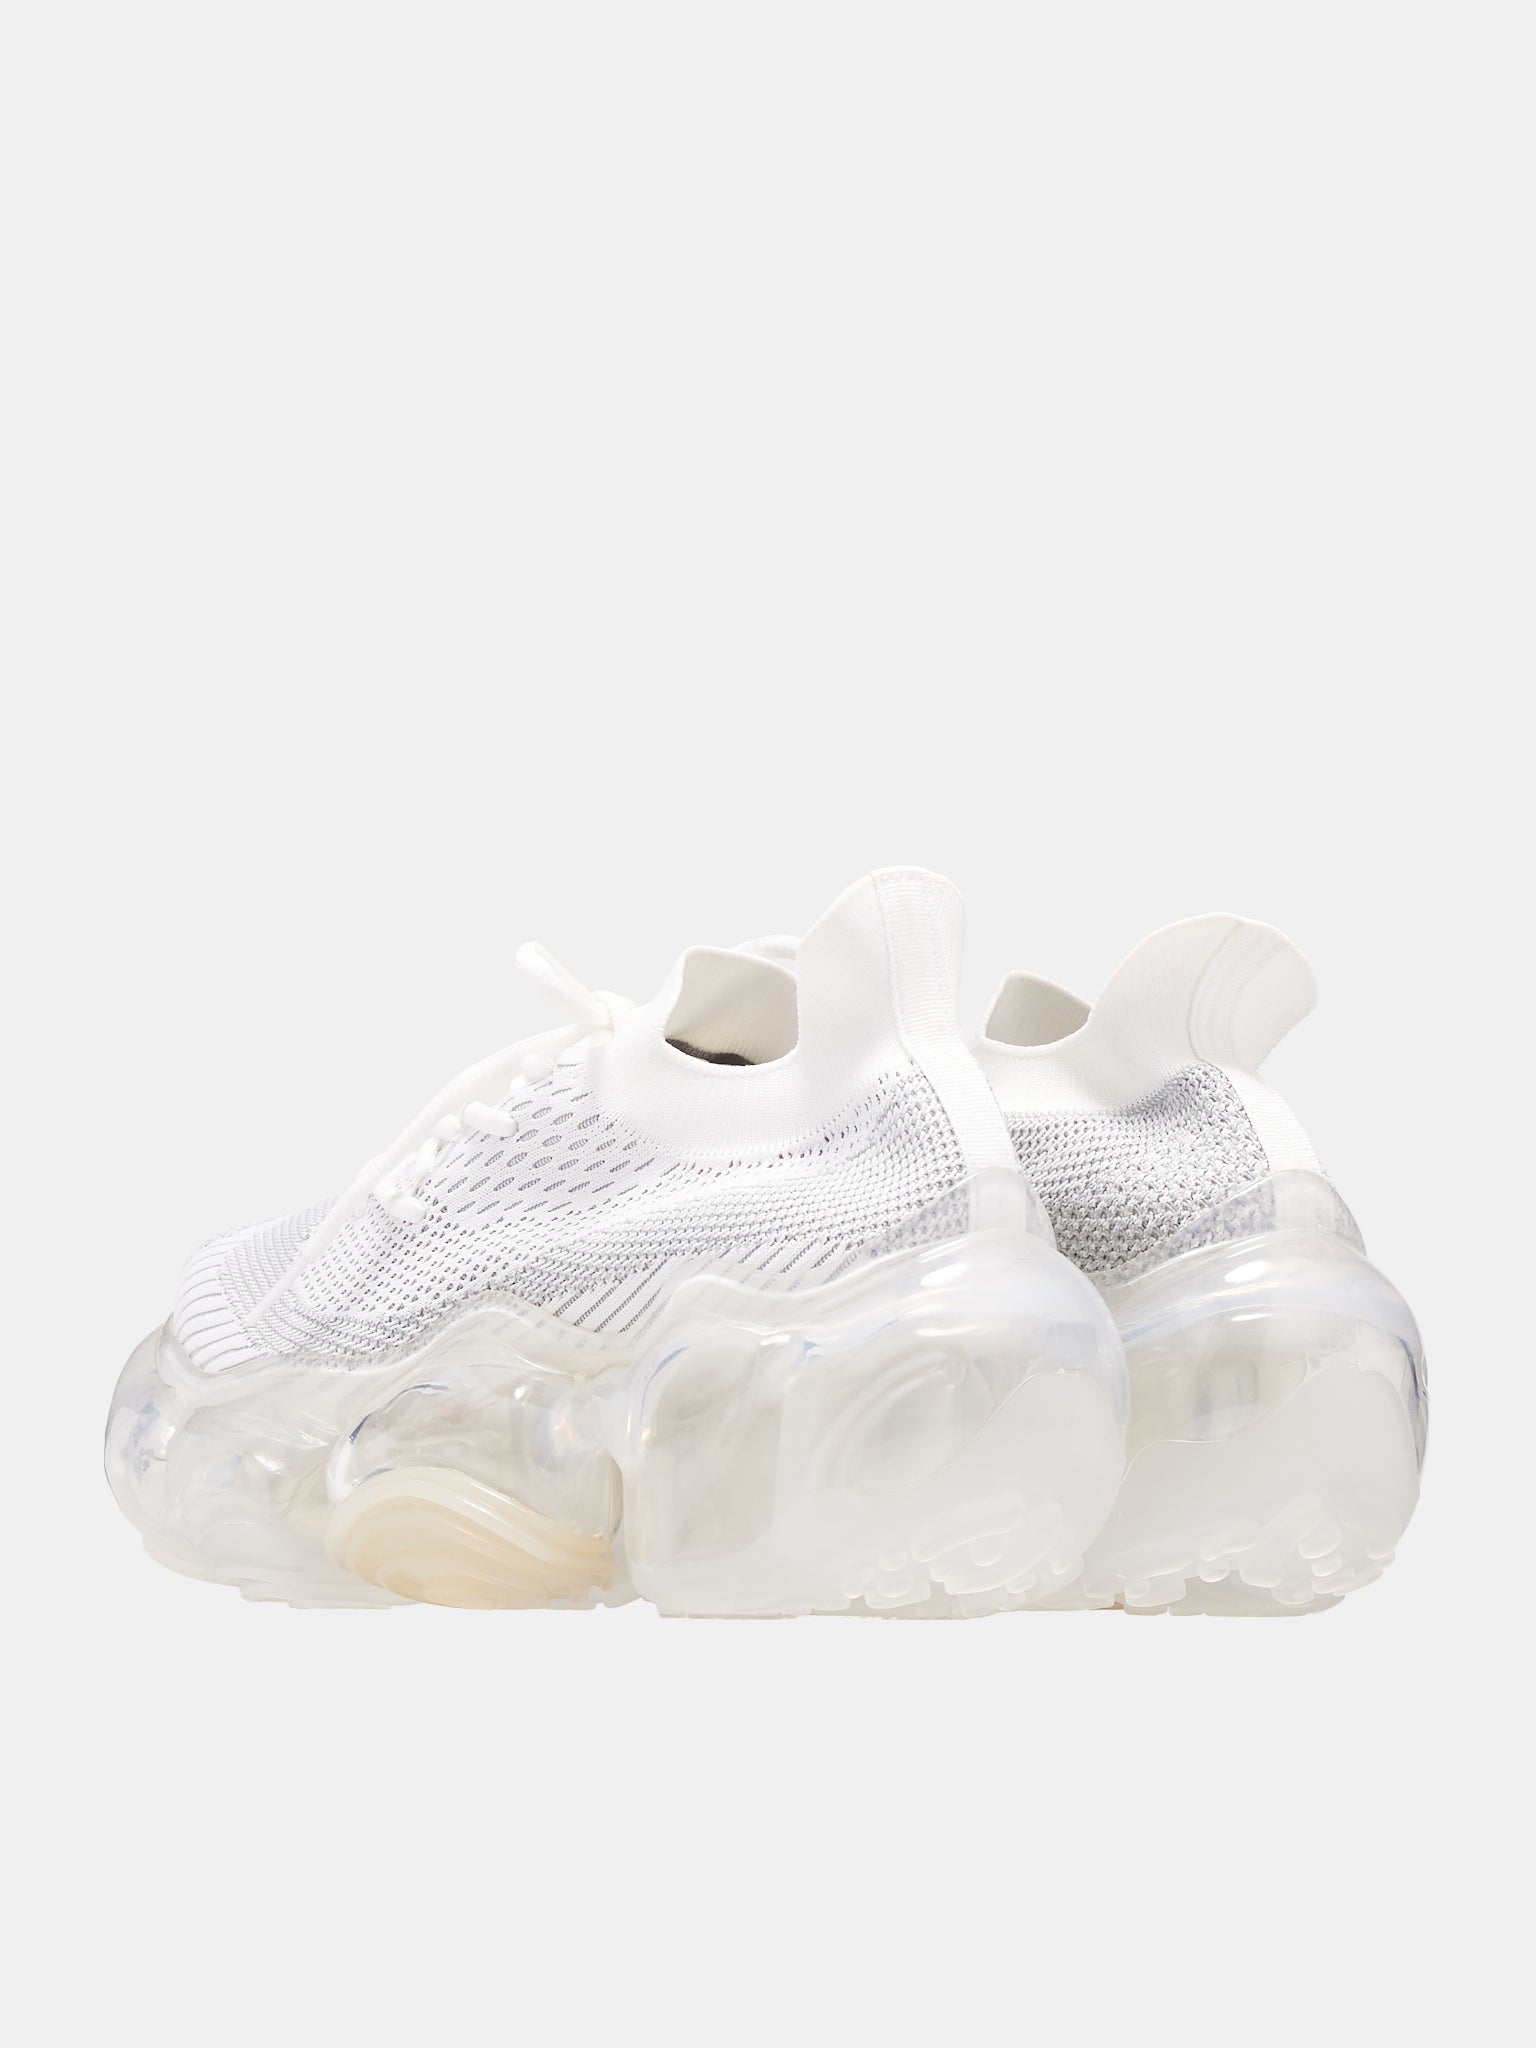 Moopie Sneakers (242-WHITE-GRAY-CLEAR)